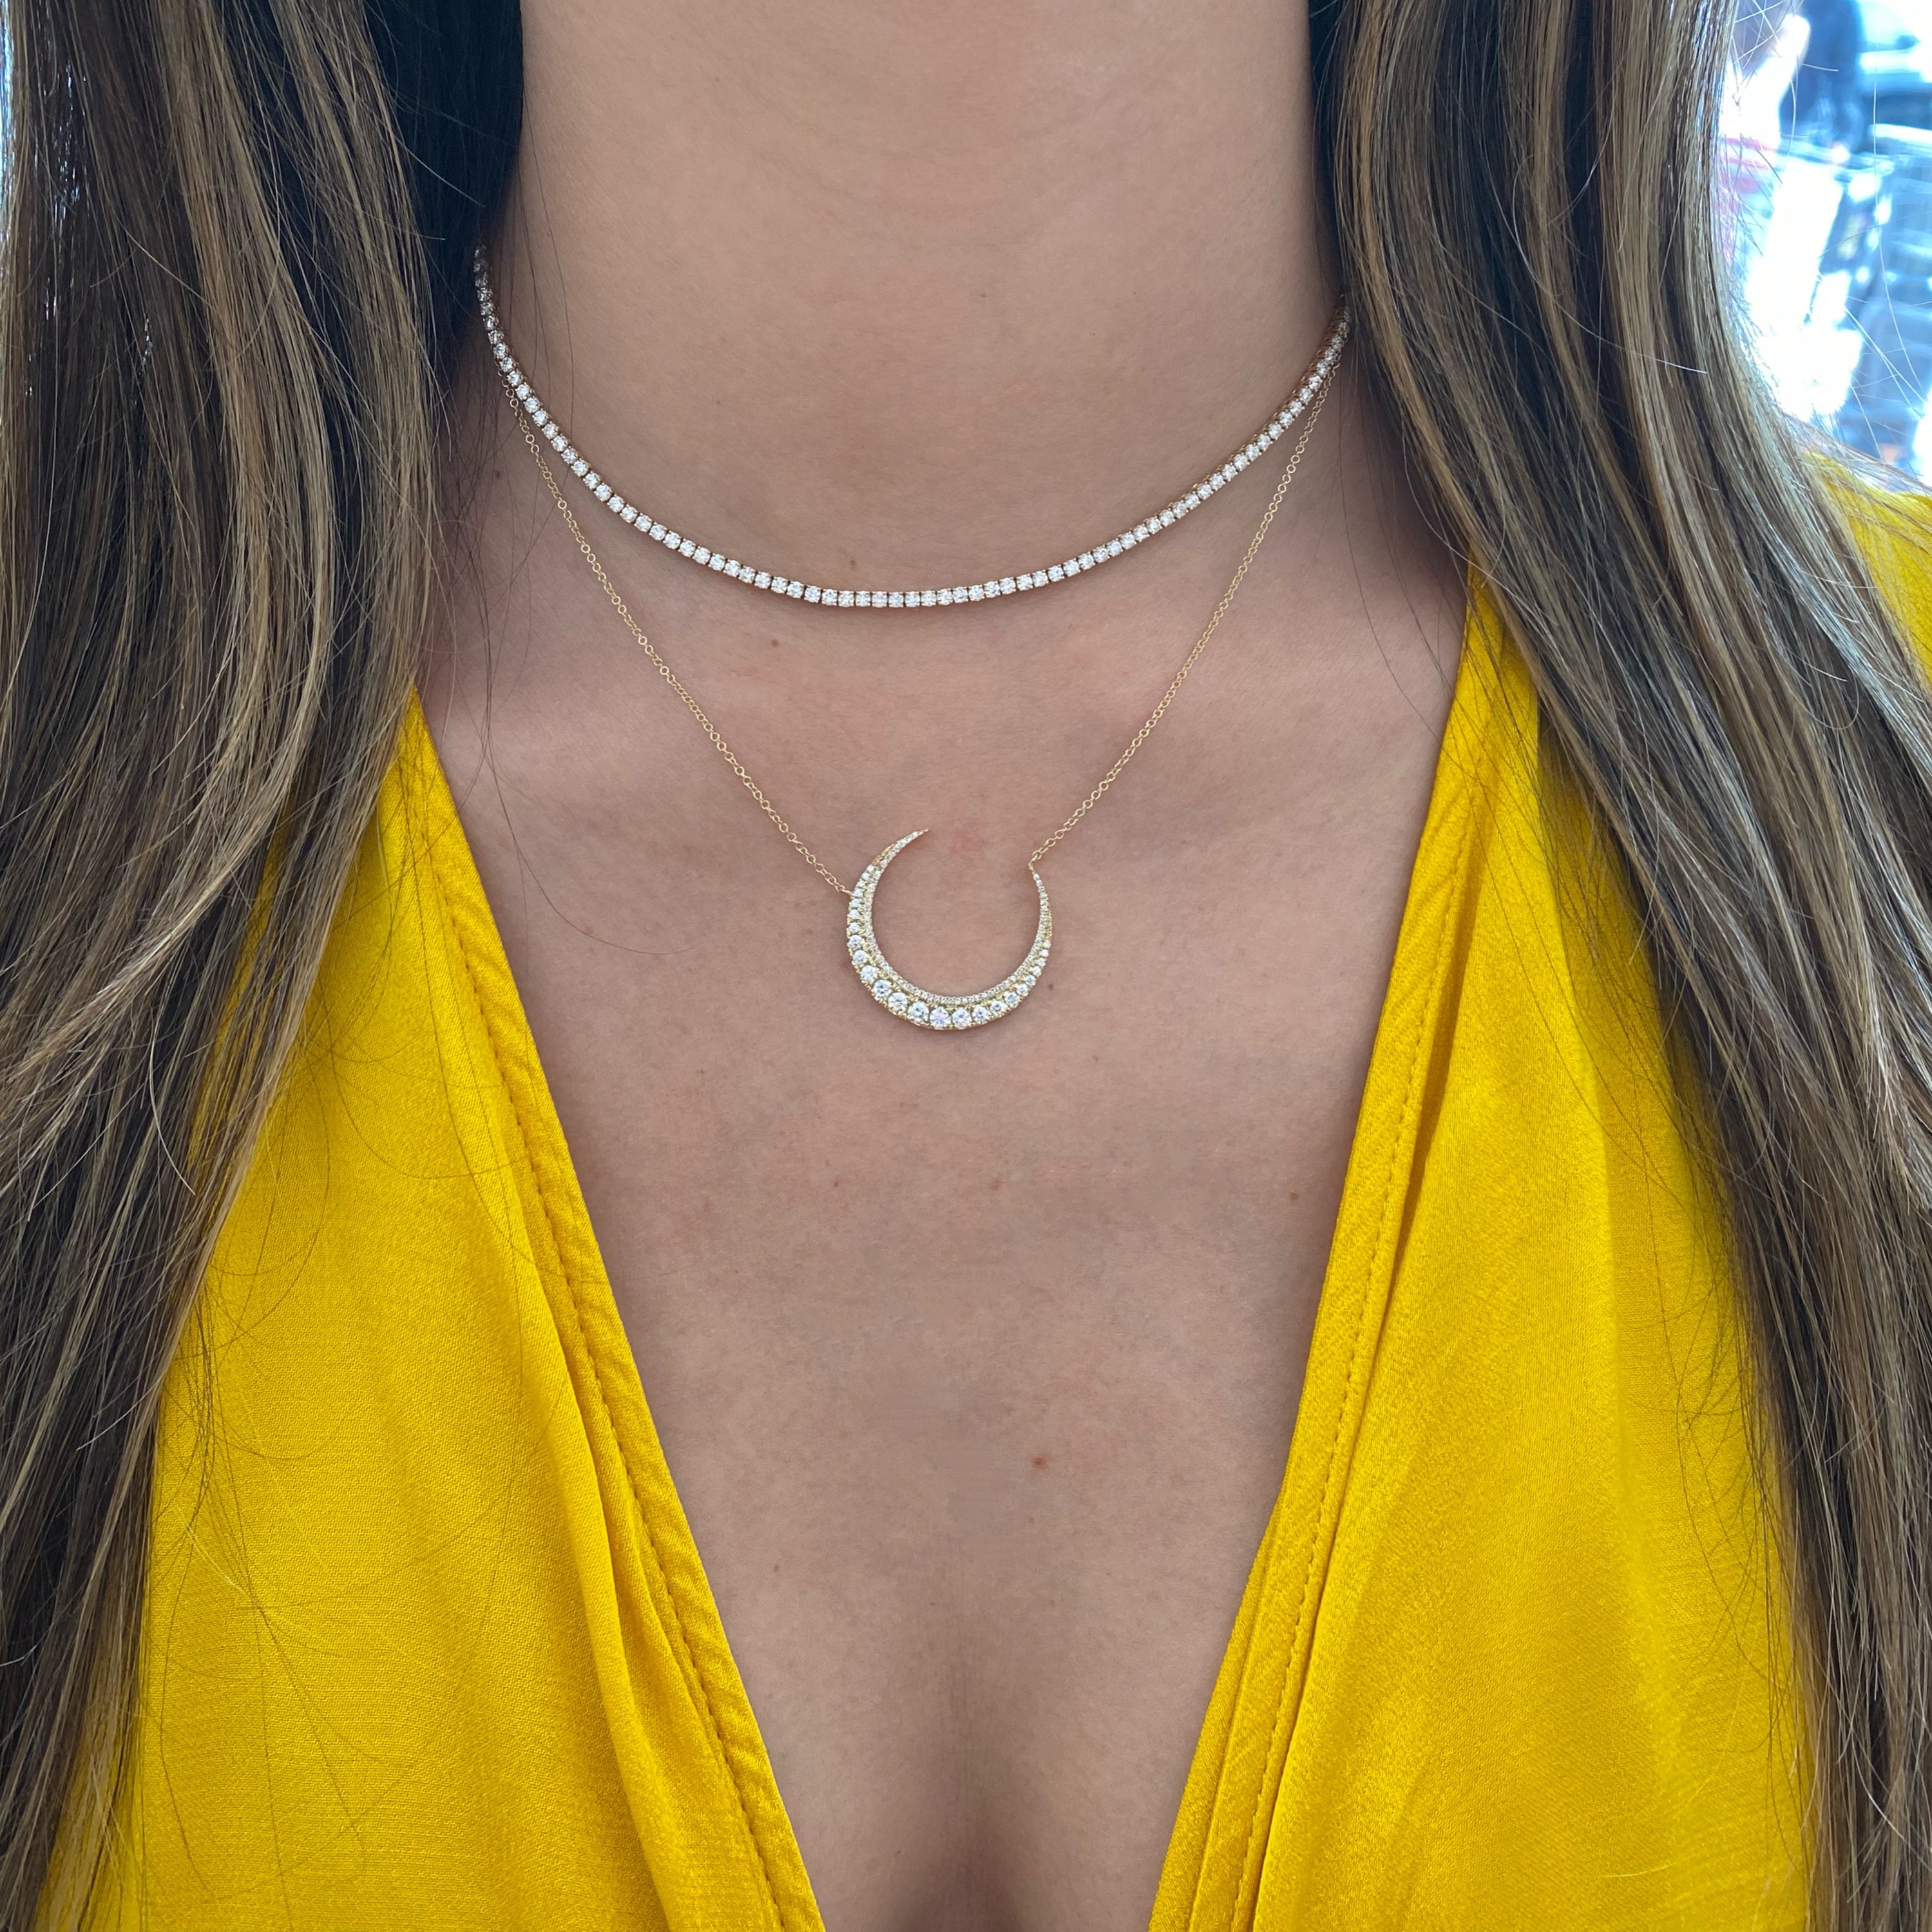 Bestyle Synthetic Moon Stone Pendant June Birthstone Necklace Gold Irish  Celtic Love Knot Jewelry Moonstone Necklace for Women Girls - Walmart.com